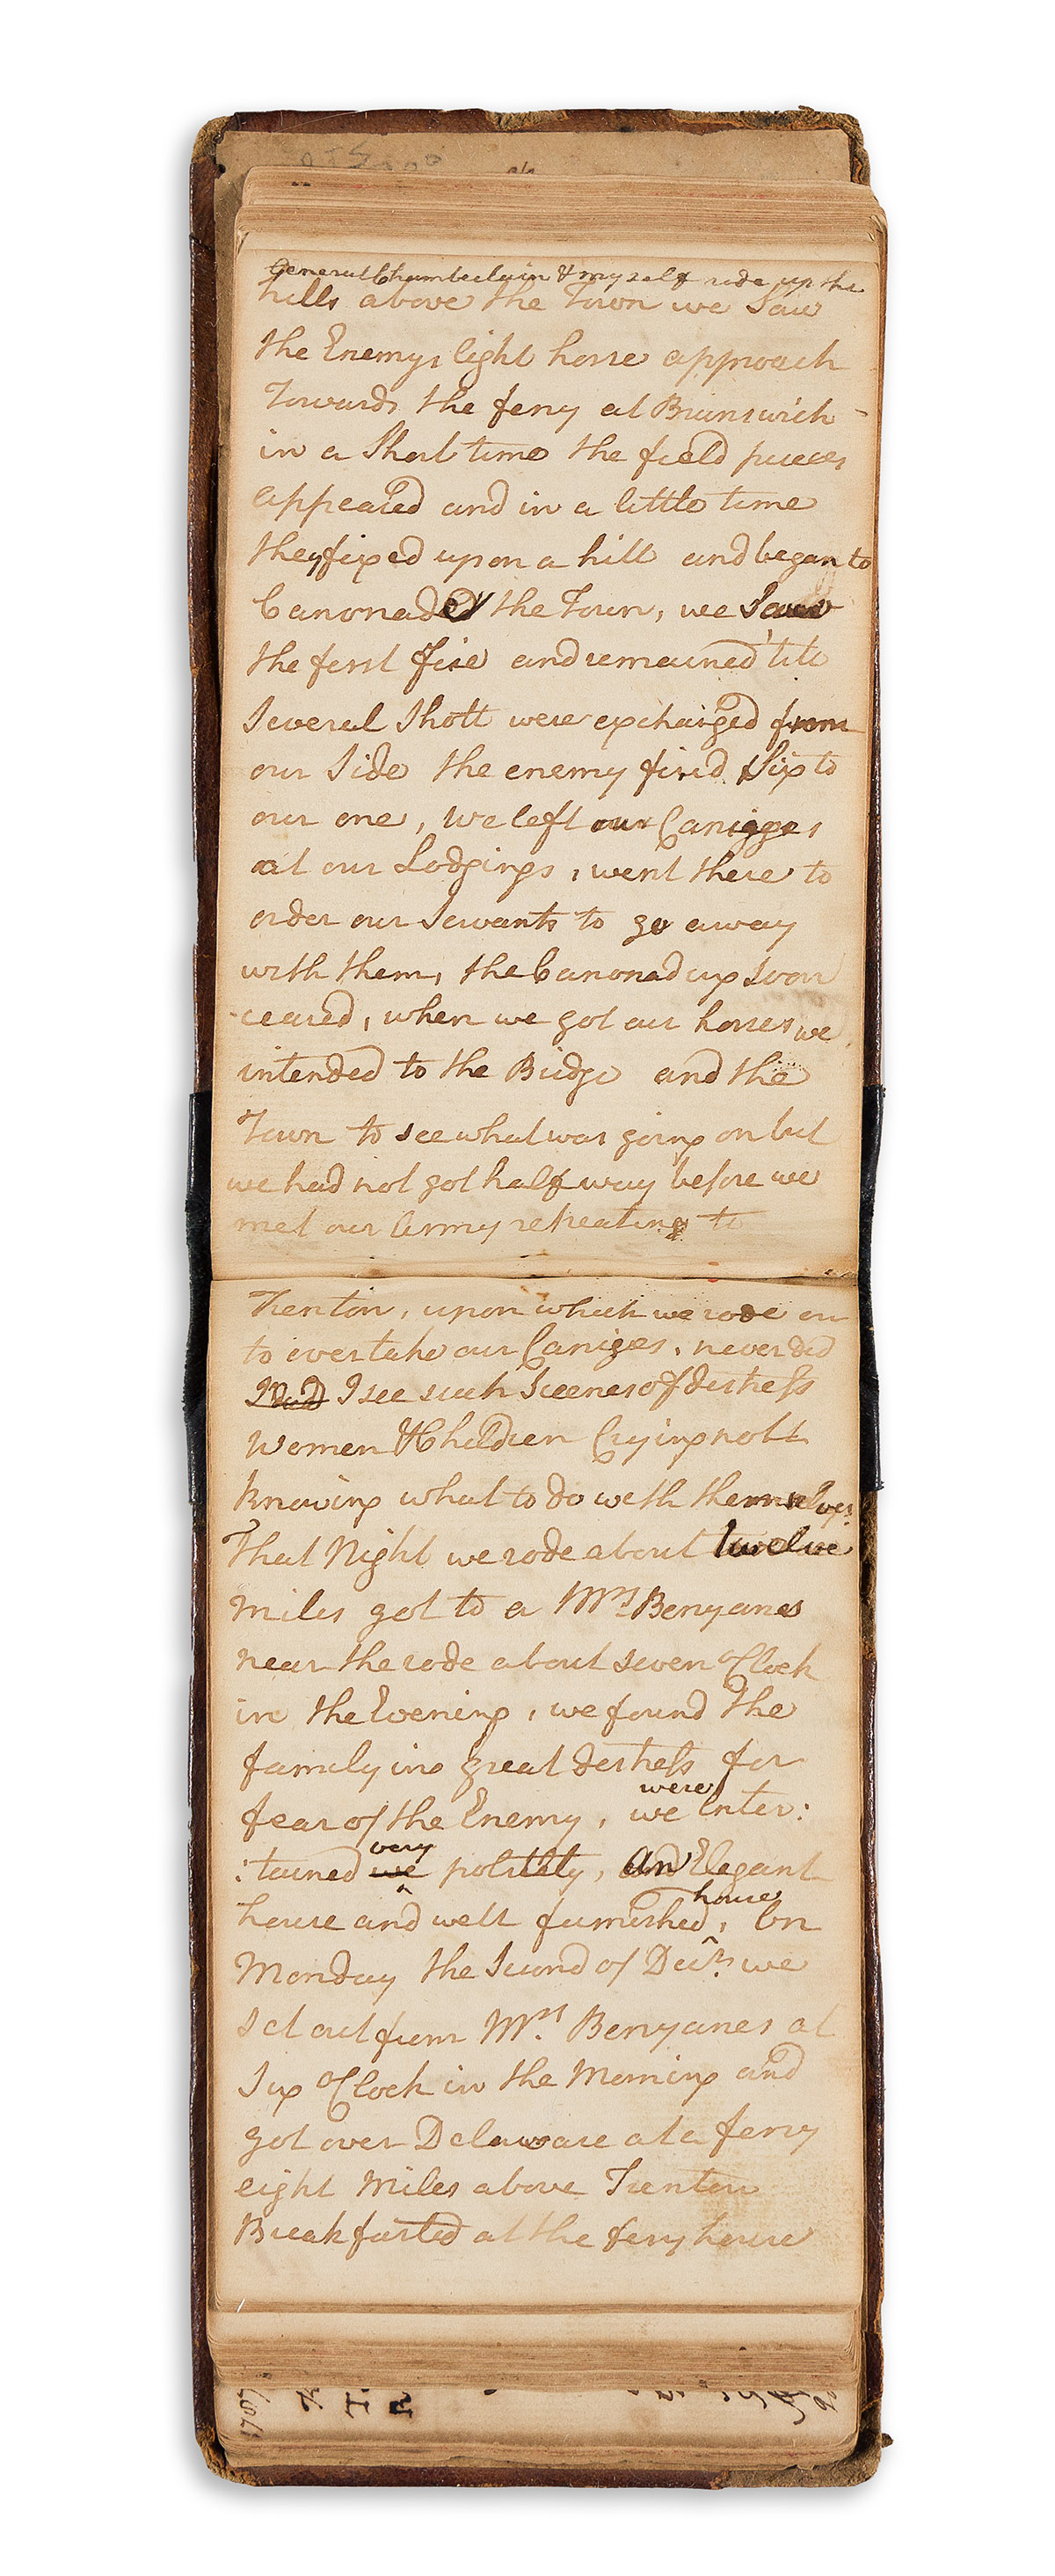 (AMERICAN REVOLUTION--1776.) Thomas Contee. Diary of meetings with Washington and Hancock in the midst of the retreat from New York.